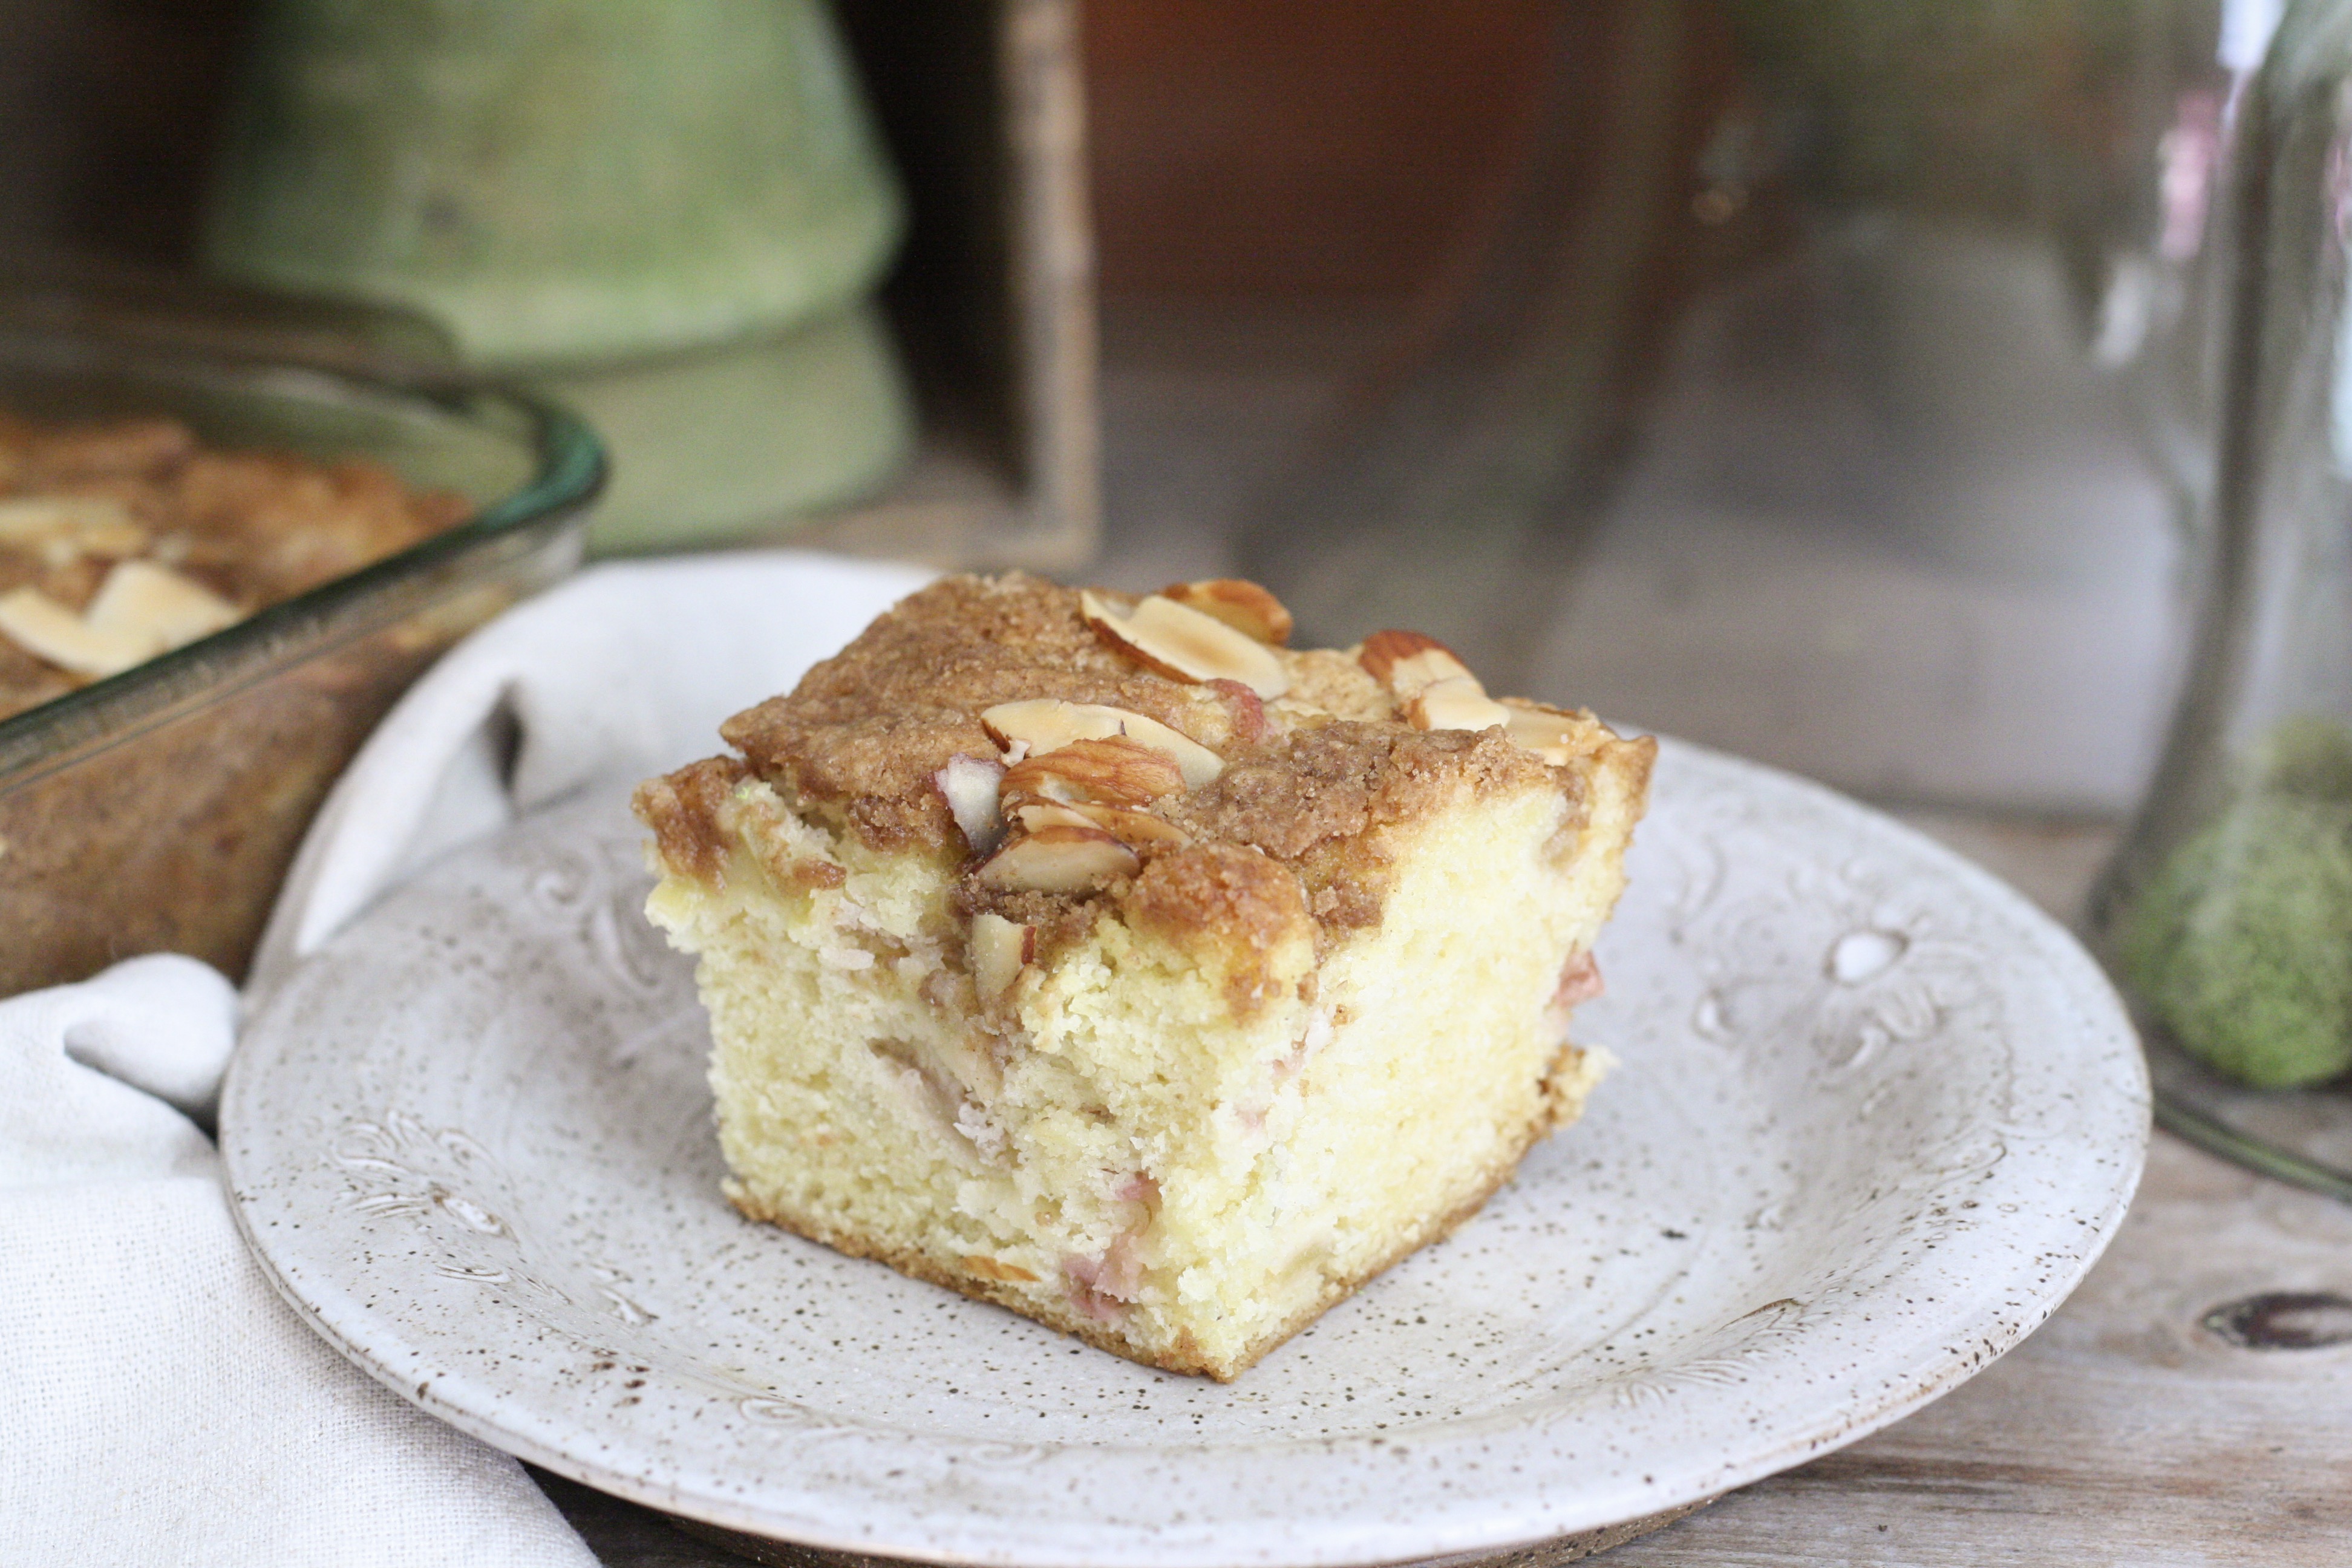 From the Garden: Almond Rhubarb Coffee Cake